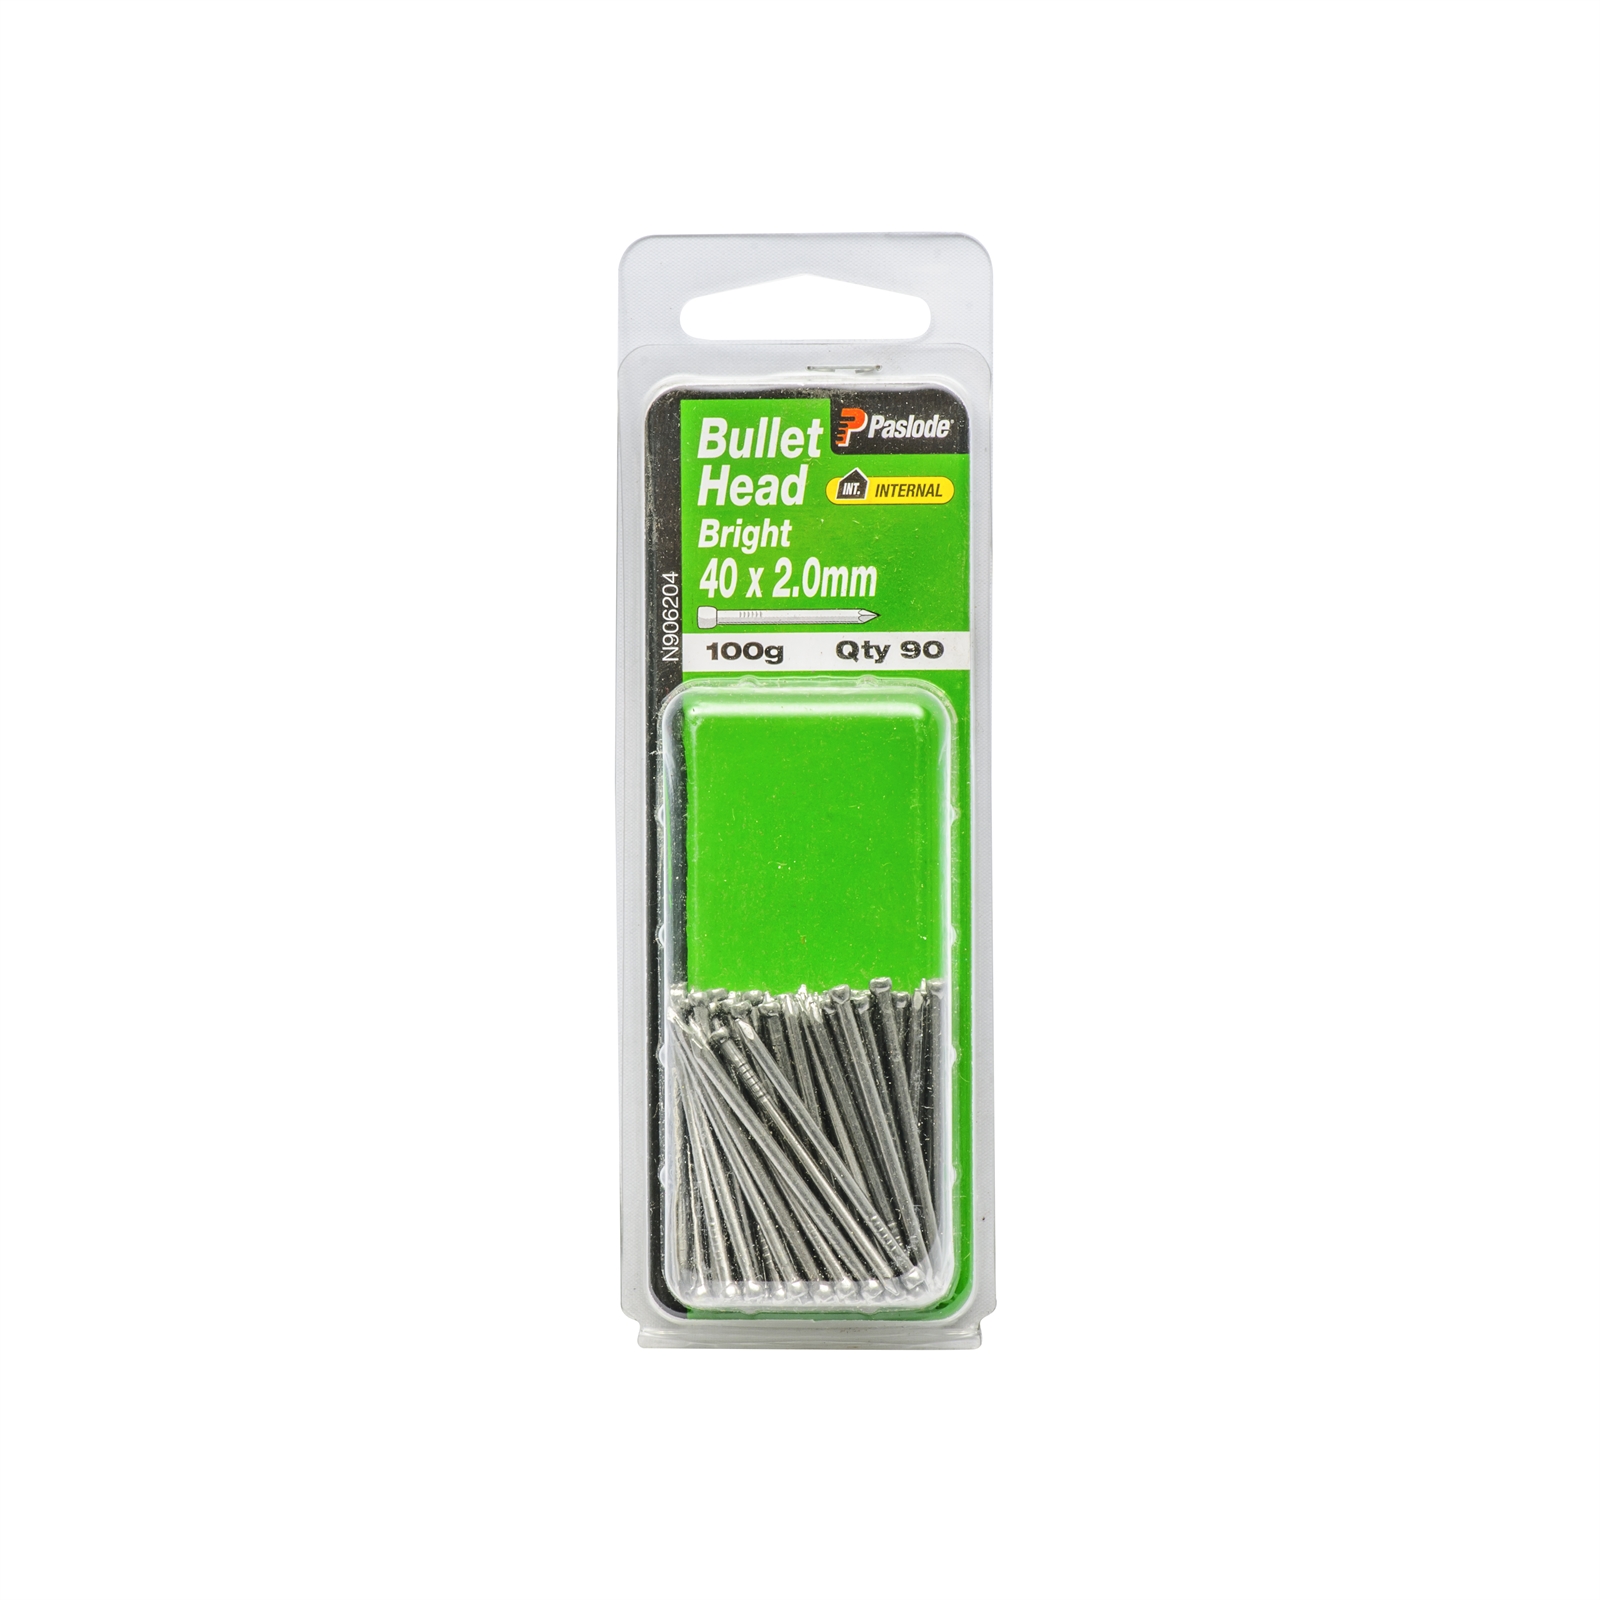 Paslode 40 x 2.0mm 100g Bright Steel Bullet Head Nails - 90 Pack